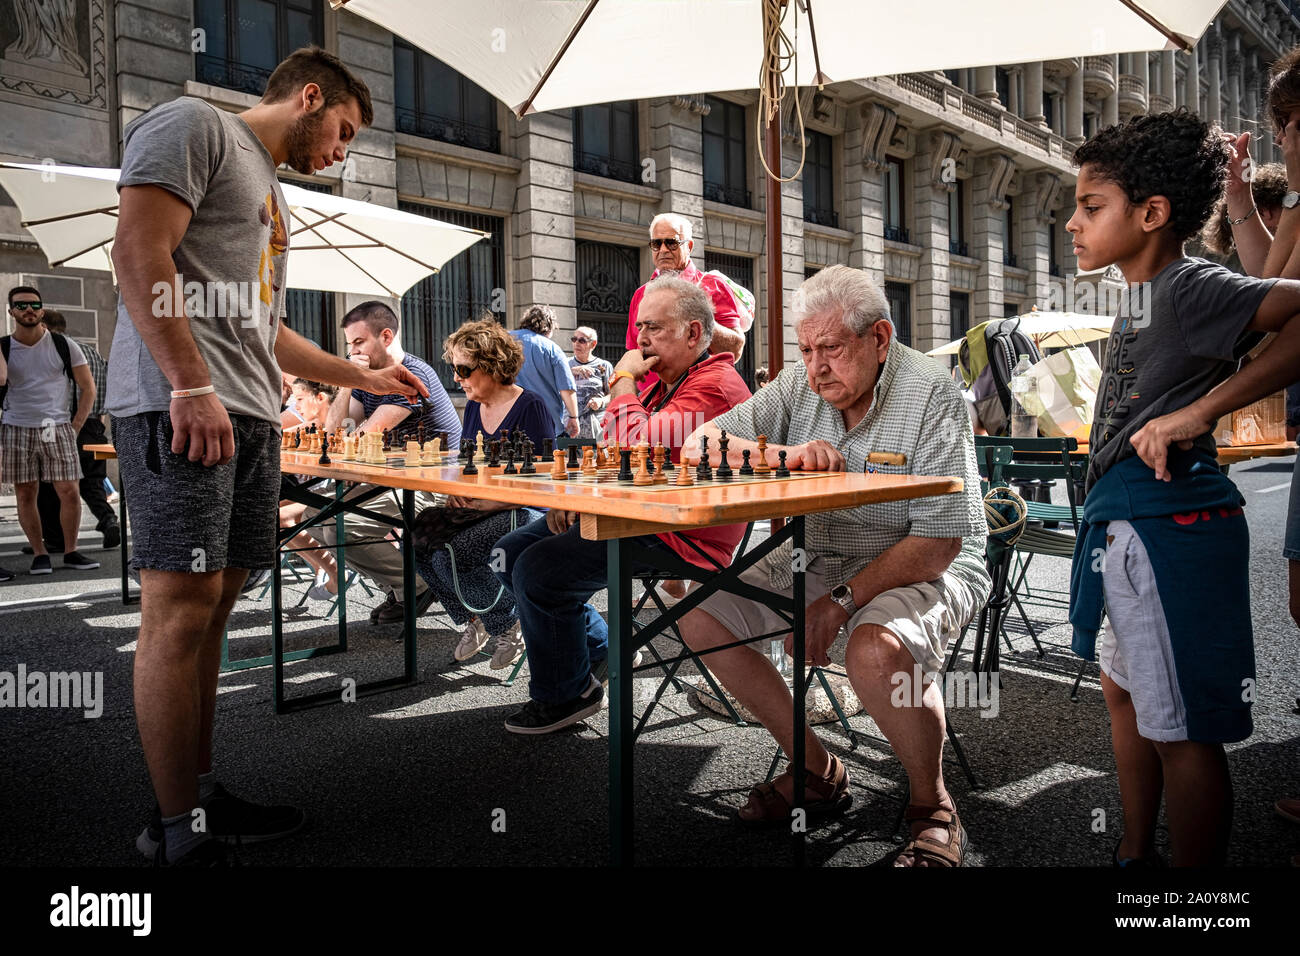 Gerard Ayats, national sub 18 chess champion plays a simultaneous exhibition game during the World Day without Cars holiday.Barcelona celebrates World Day without a Car by conditioning one of the main arteries of the city for the use of citizens with different cultural recreational activities. Thousands of citizens have enjoyed a festive day on Via Laietana with the circulation completely closed to vehicles. Stock Photo